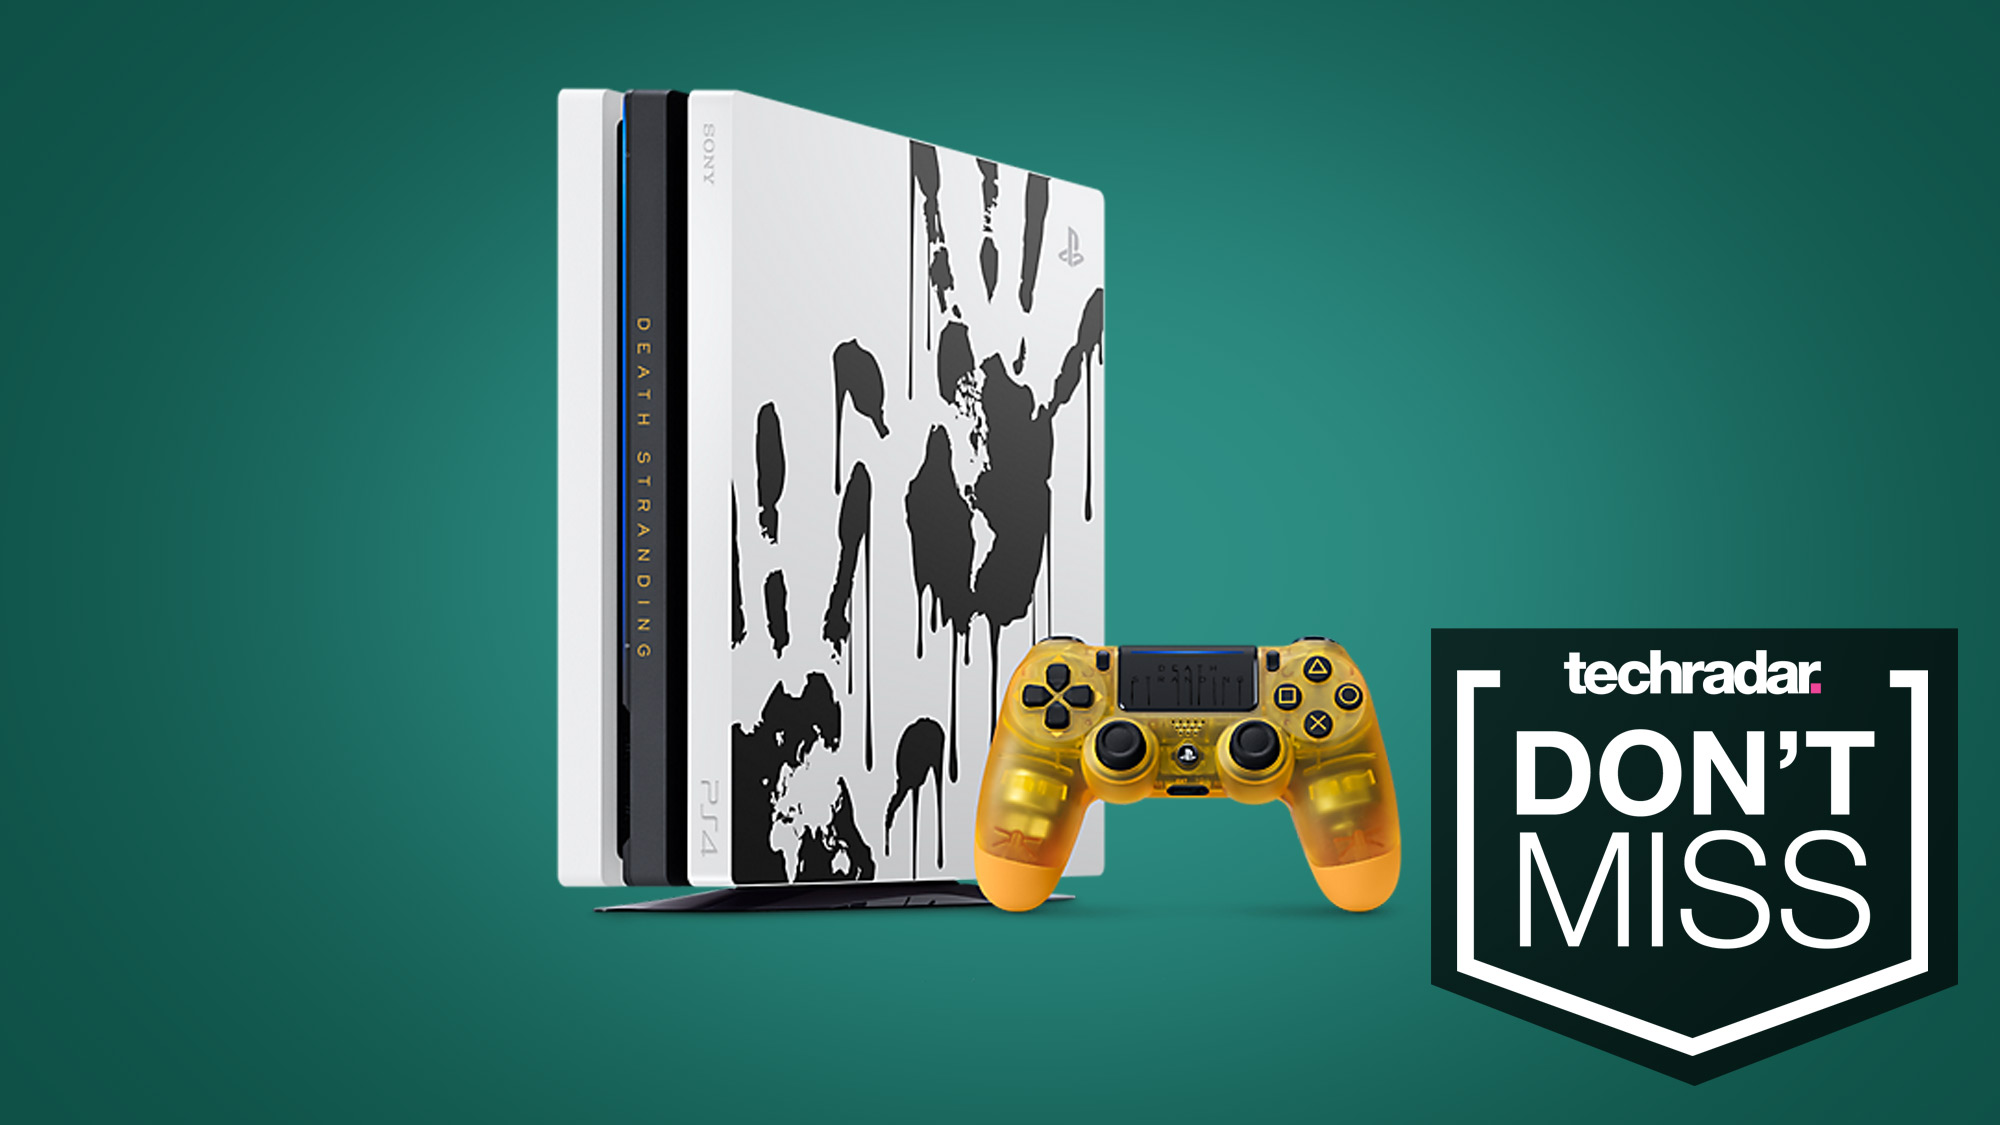 You can still pick up this limited edition Death Stranding PS4 Pro bundle  for £330 TechRadar